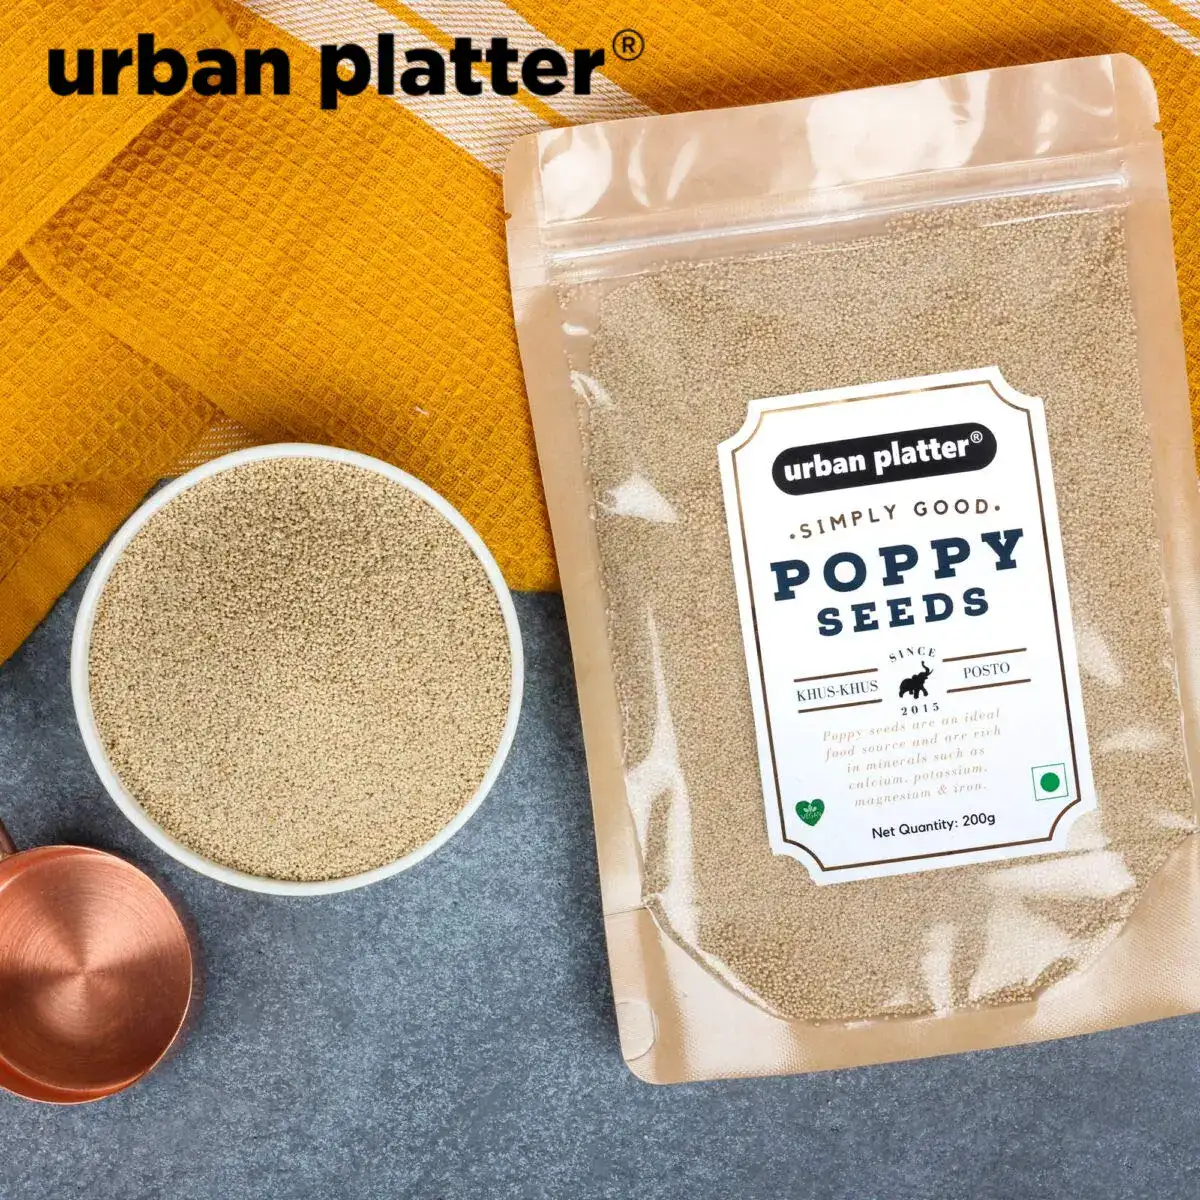 urban platter products